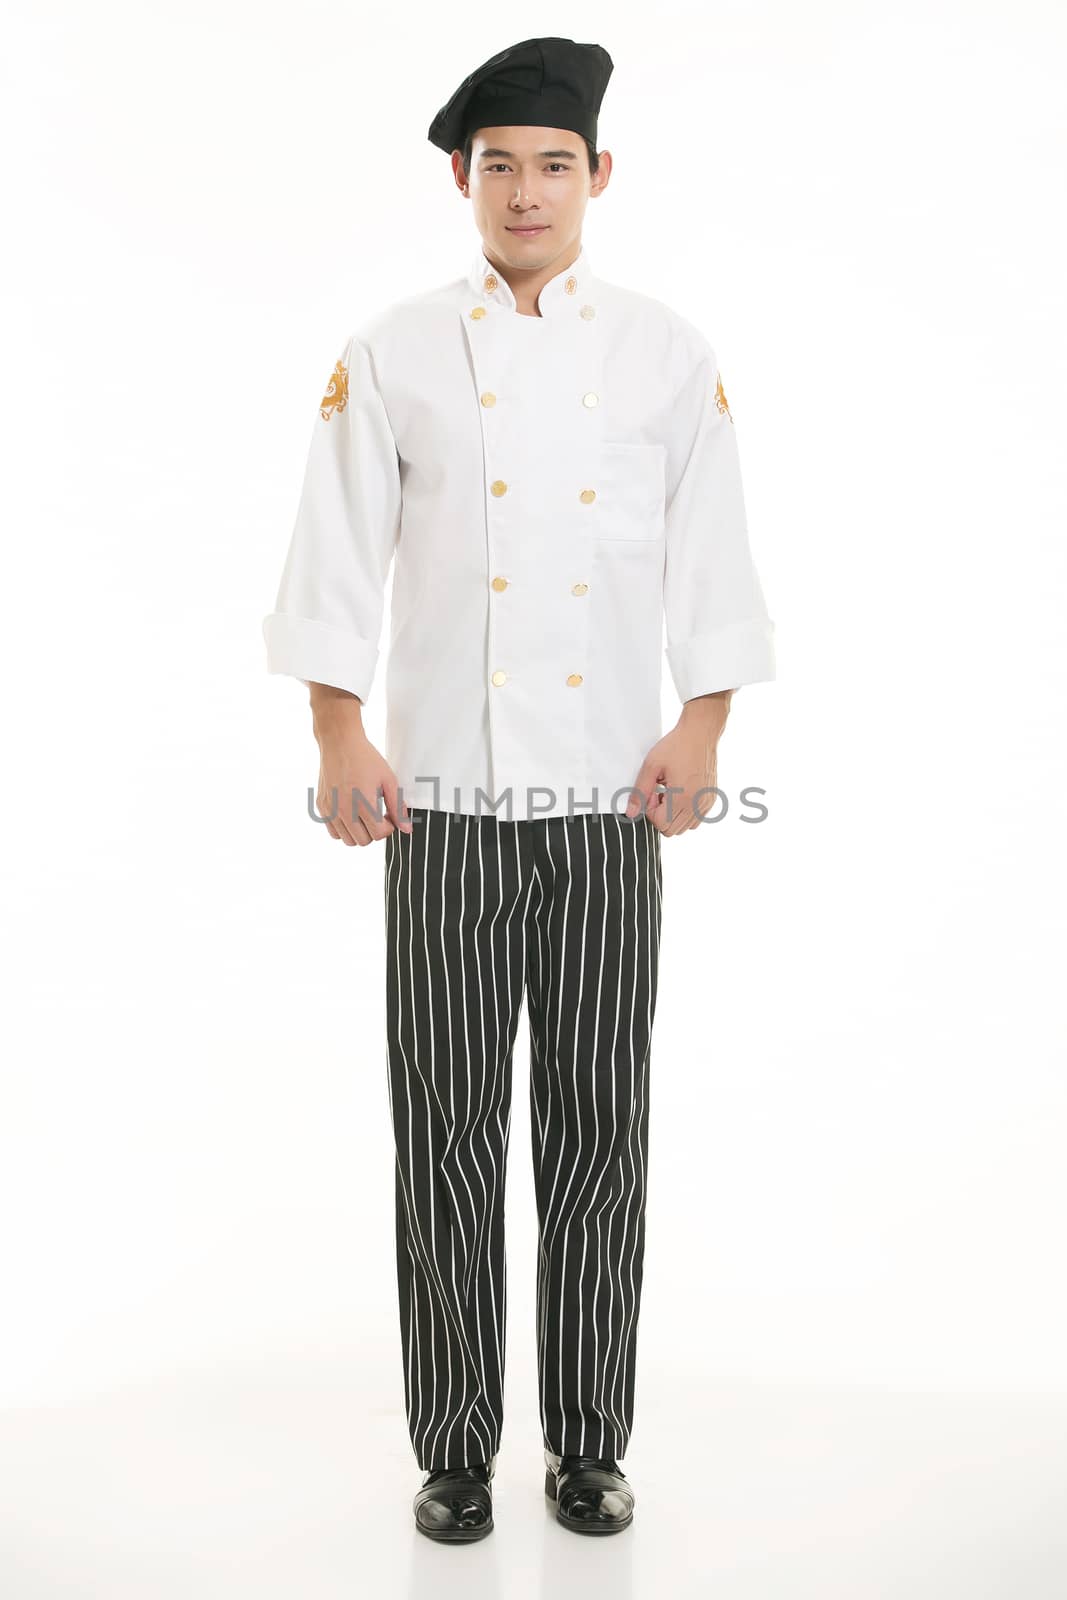 Wearing all kinds of clothing chef dietitian in front of white background